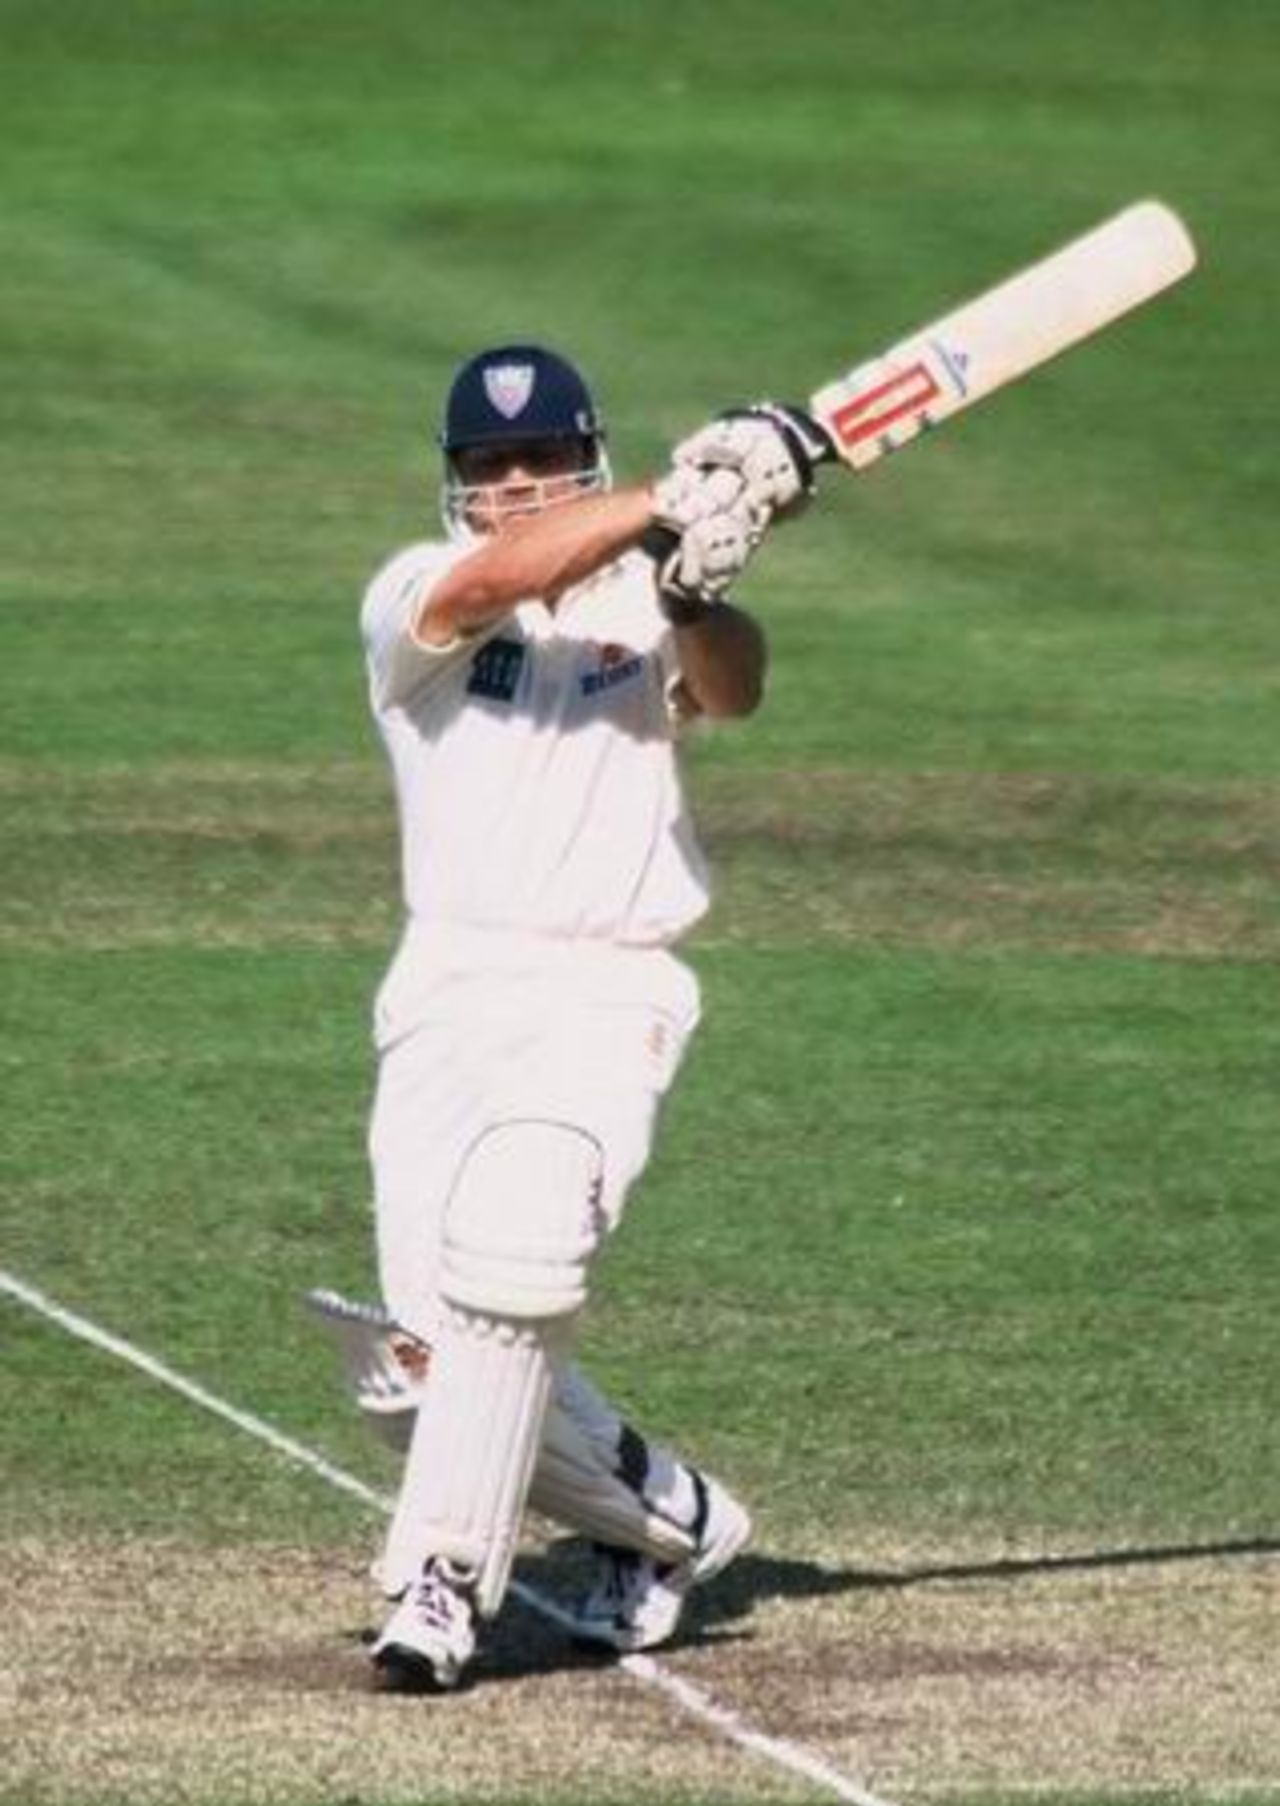 Michael Slater batting for New South Wales